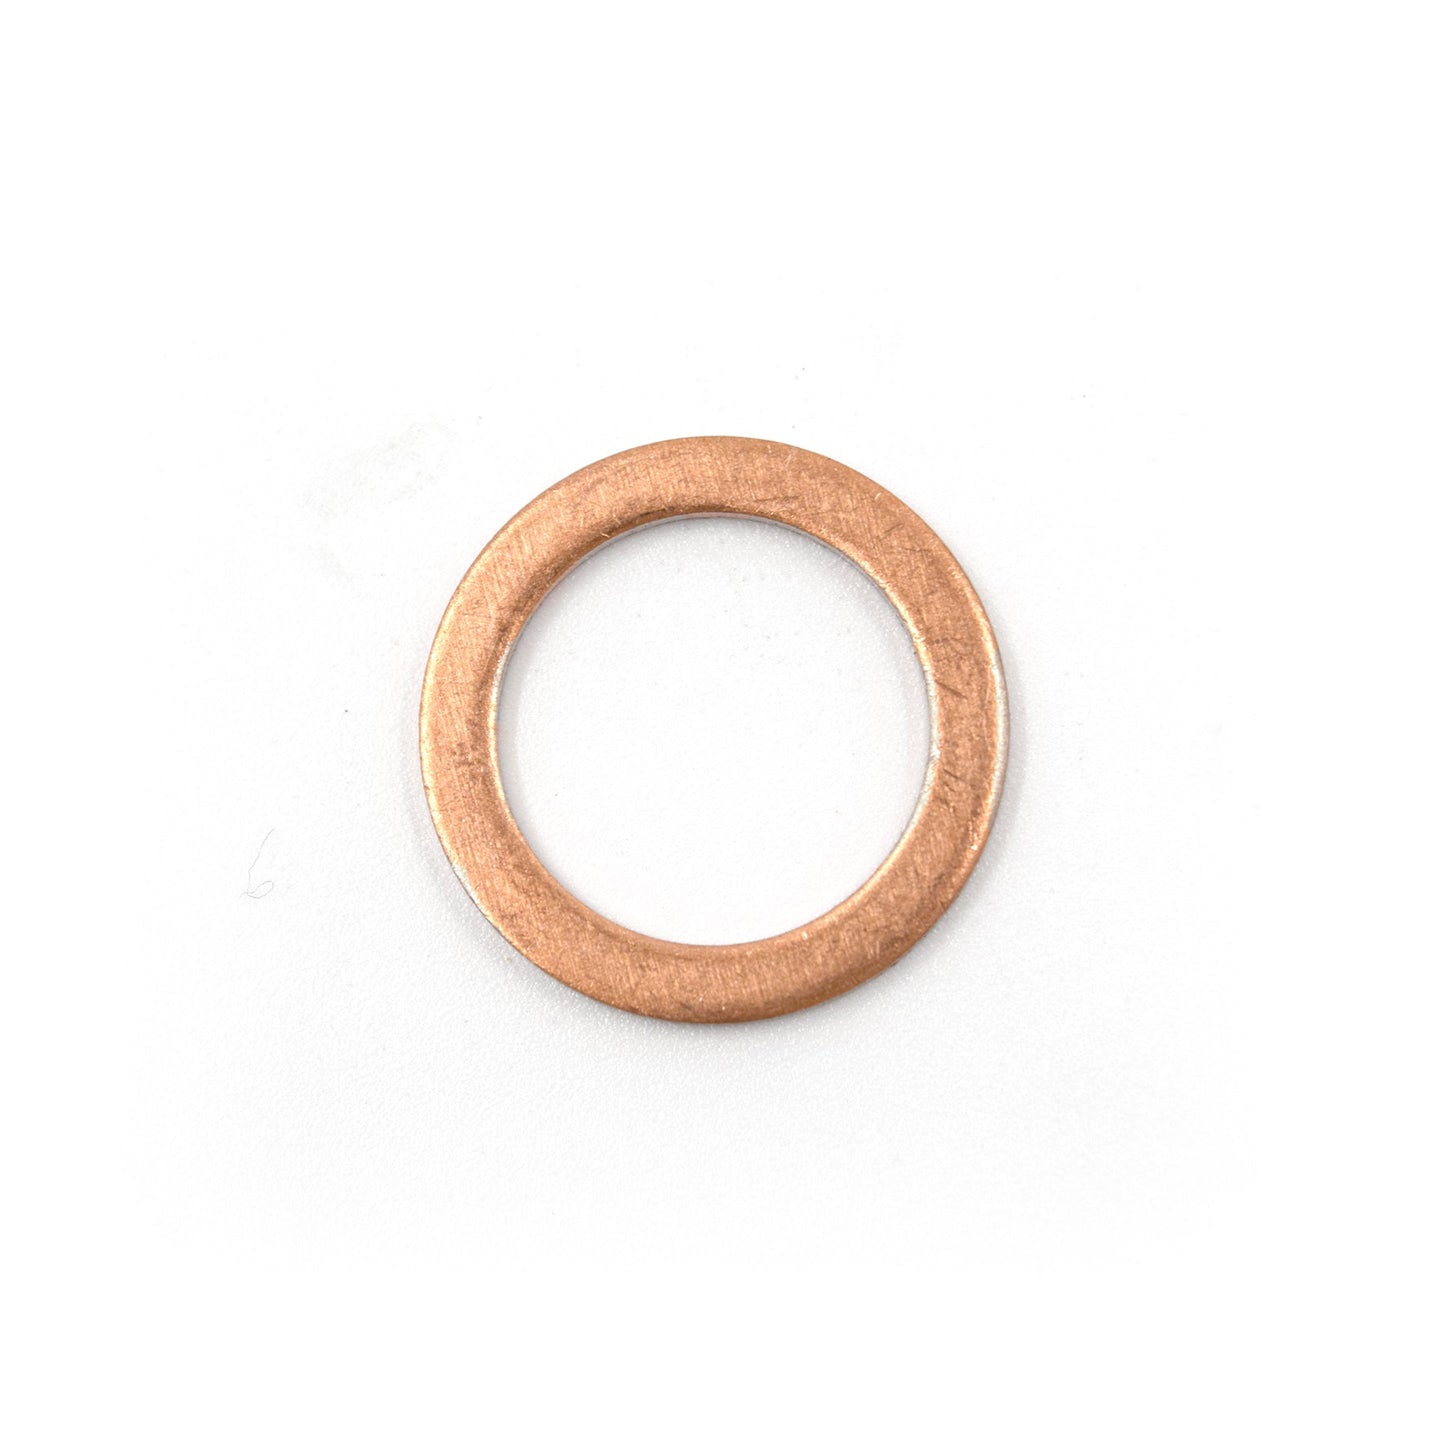 M12 Copper Washers (Pack of 10)